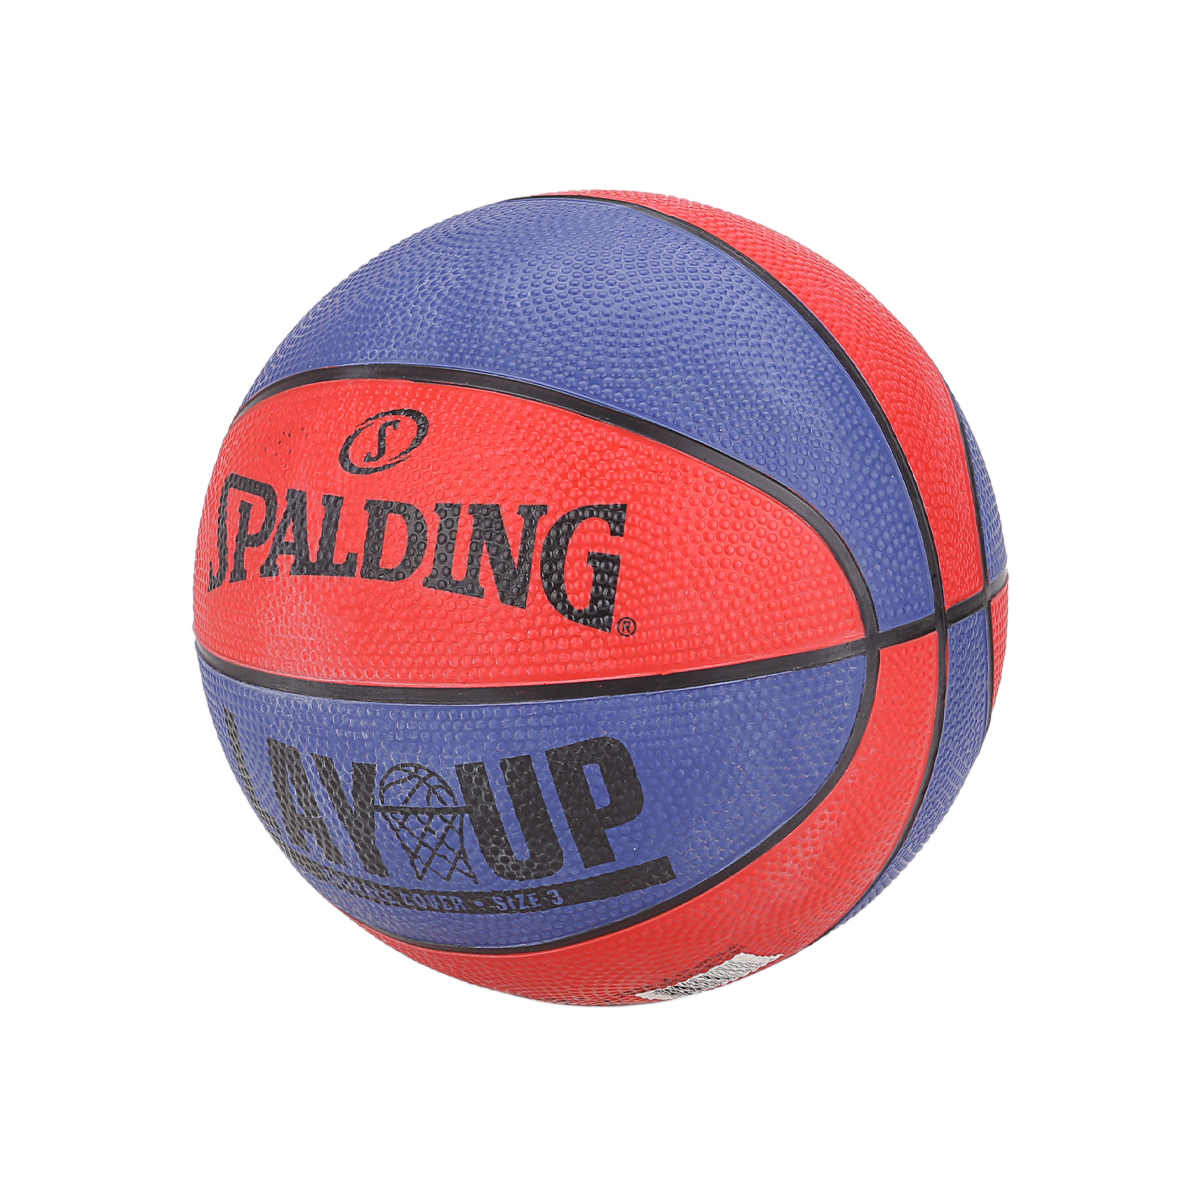 Pelota Spalding Lay Up Outdoor,  image number null